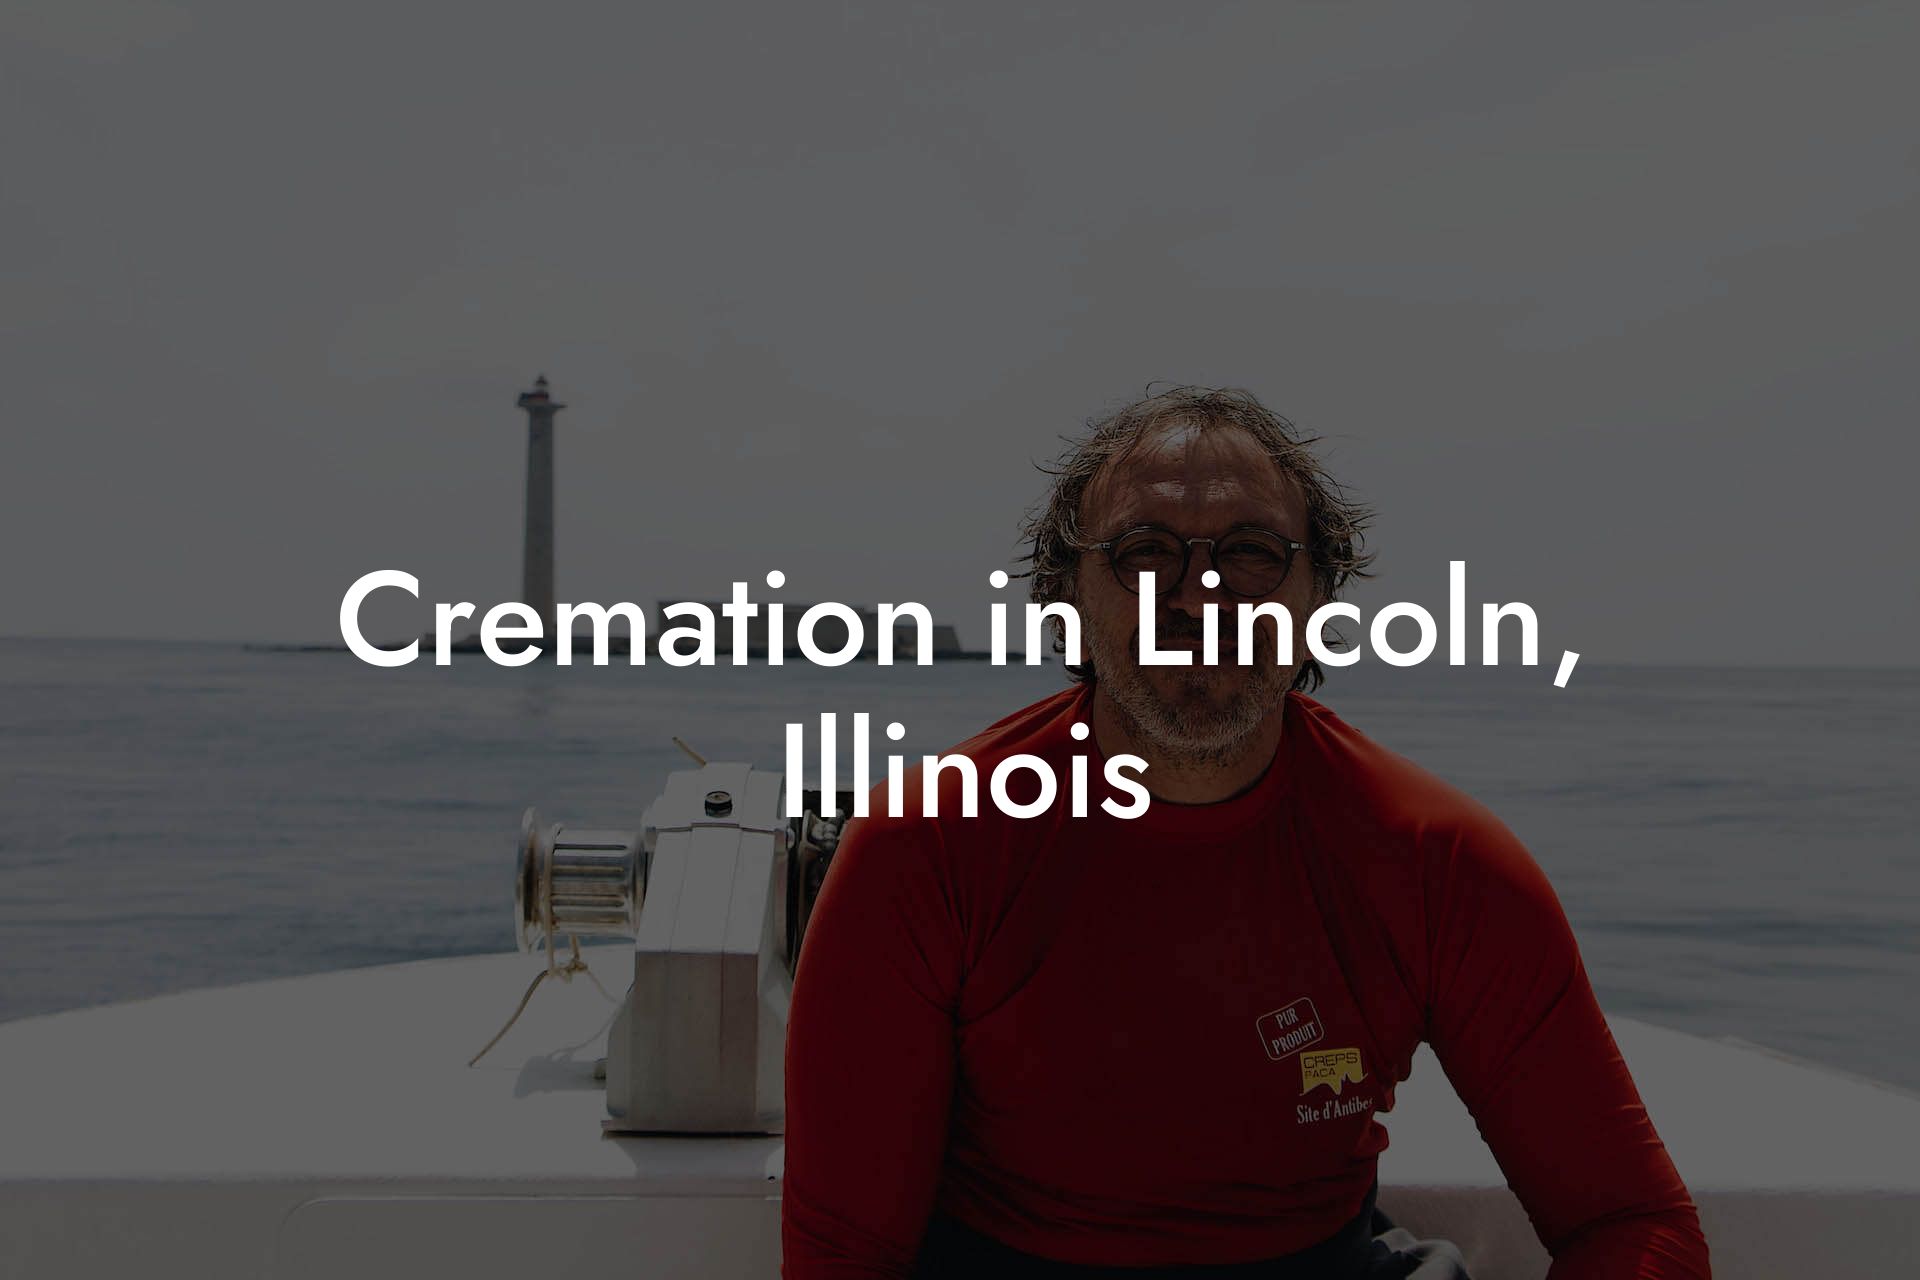 Cremation in Lincoln, Illinois